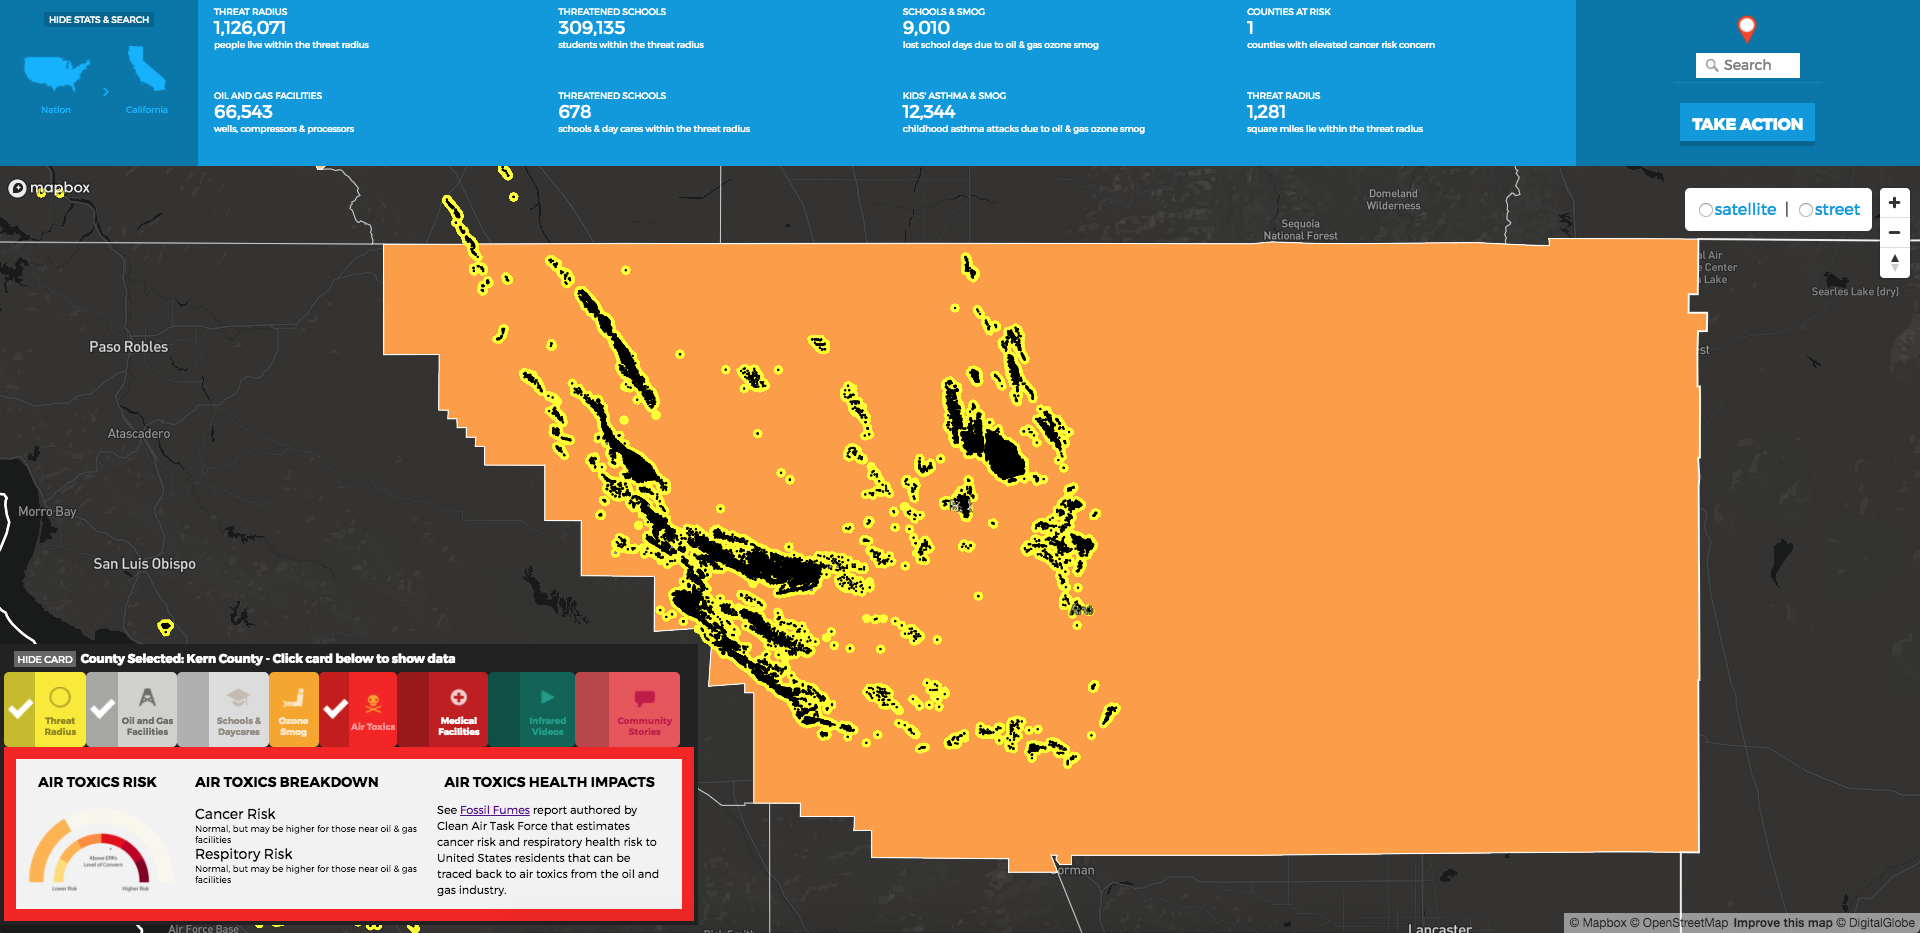 Threat Radius Vs Air Toxics Risk The Oil And Gas Threat Map